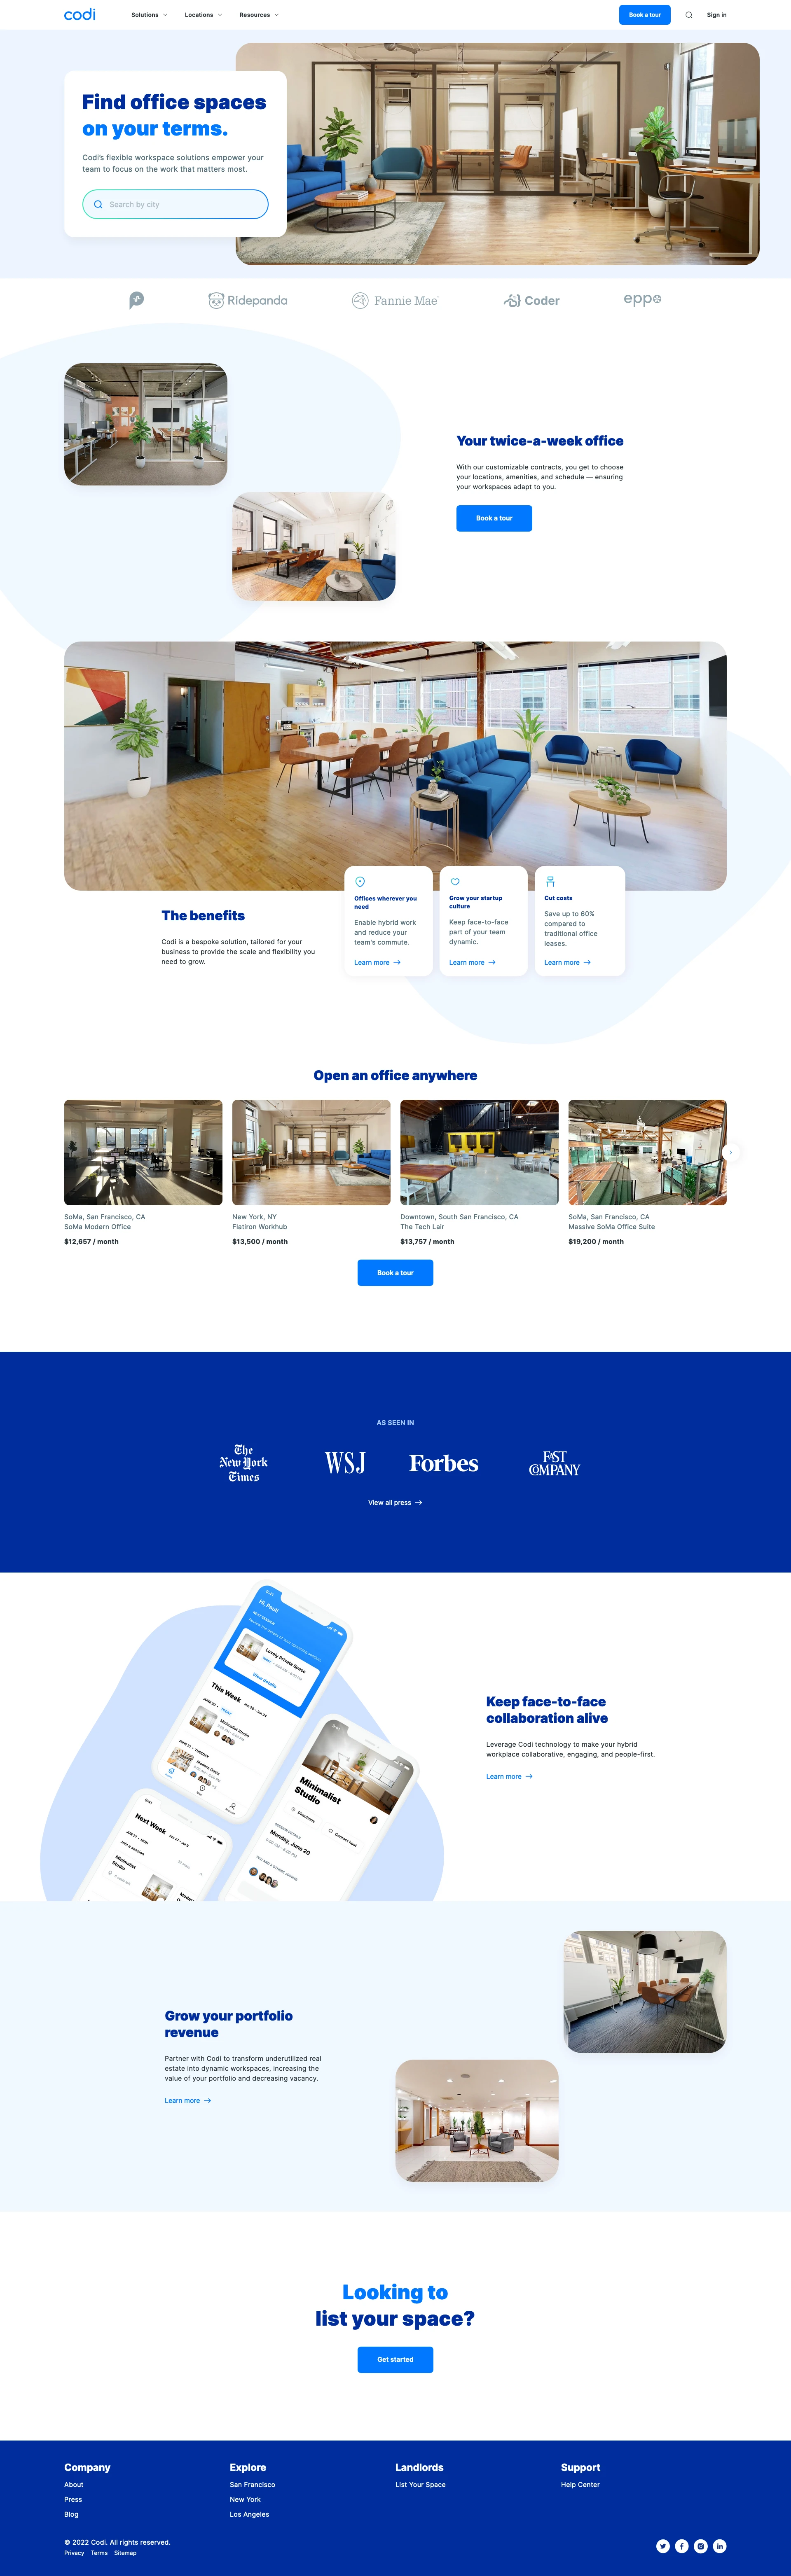 Codi Landing Page Example: Codi is the most flexible office space platform that adapts to your team’s hybrid work needs as you grow. With our customizable contracts, you get to choose your locations, amenities, and schedule, ensuring your workspaces adapt to you.